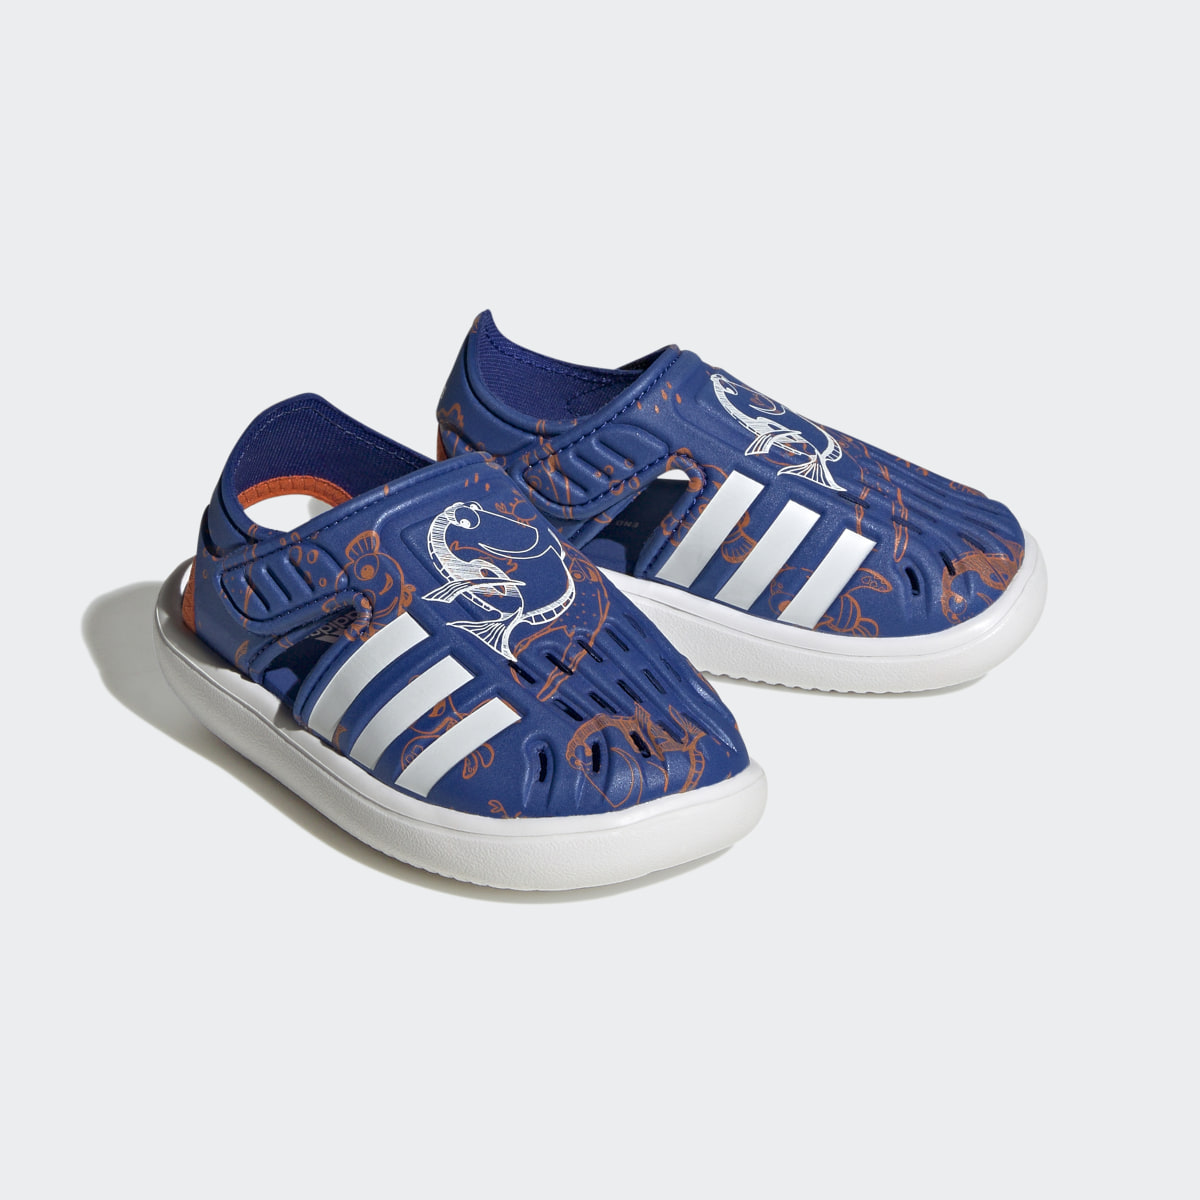 Adidas x Disney Finding Nemo and Dory Closed Toe Summer Water Sandals. 5